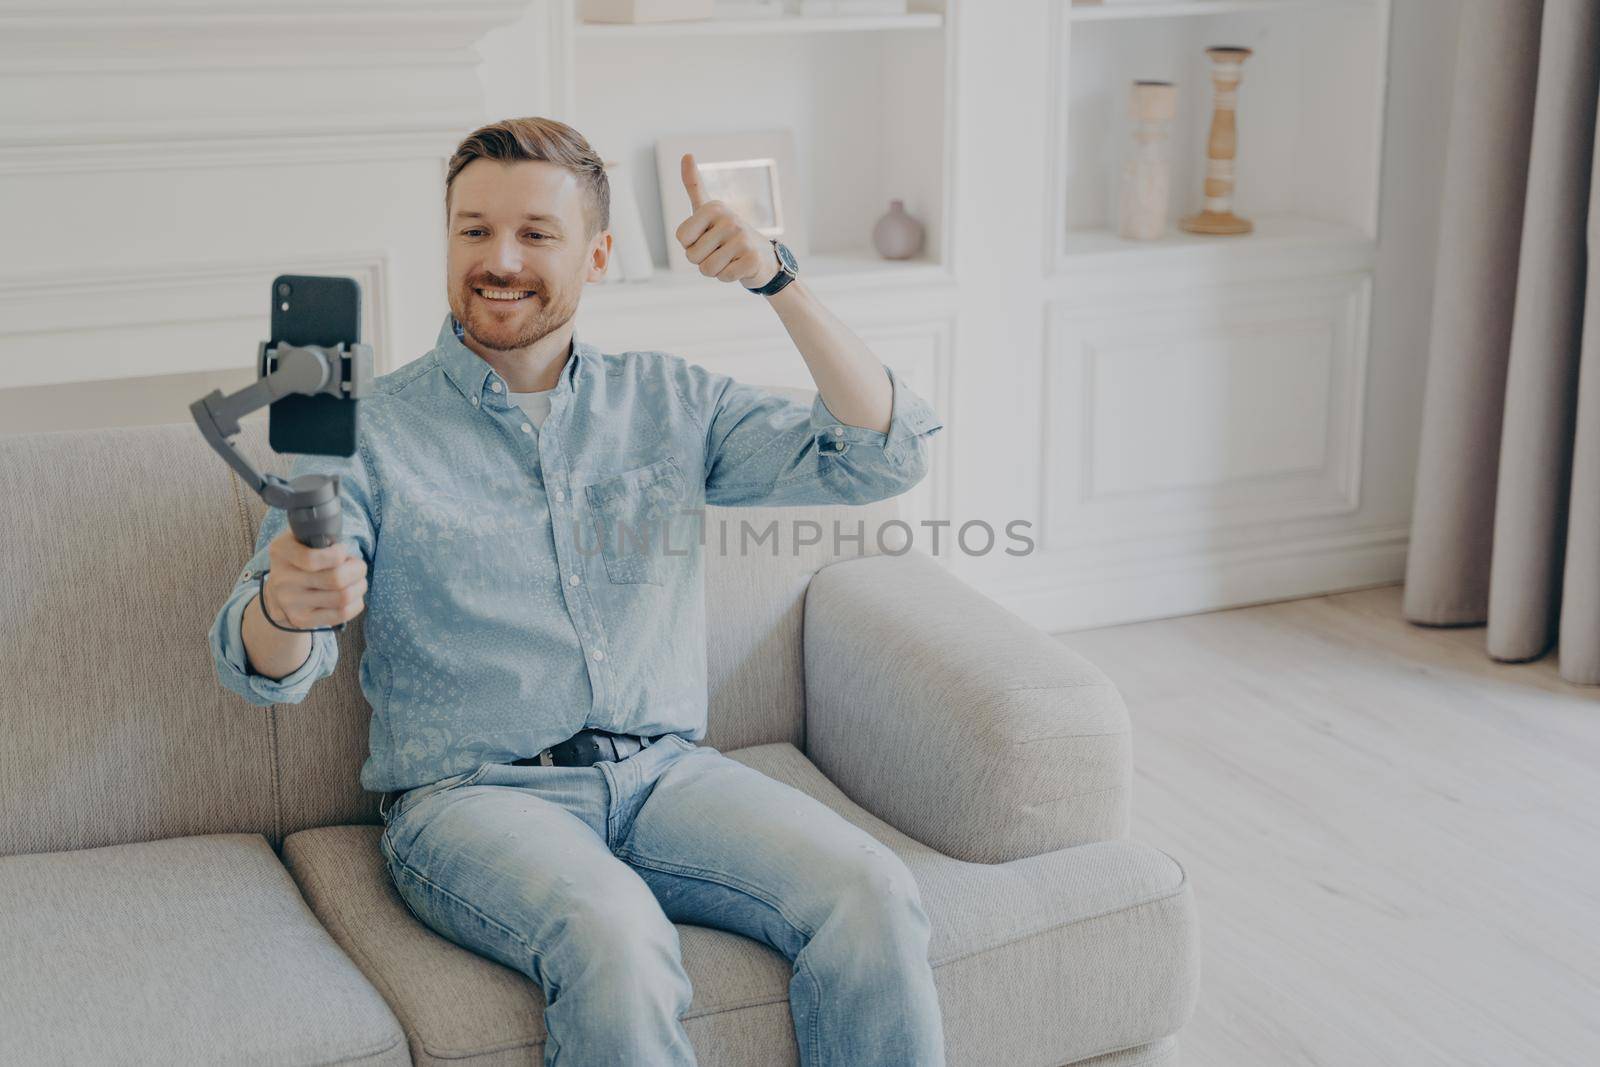 Positive smiling young man dressed in casual clothes showing thumbs up gesture in video chat, holding phone using gimbal, sitting alone on beige couch in light themed living room